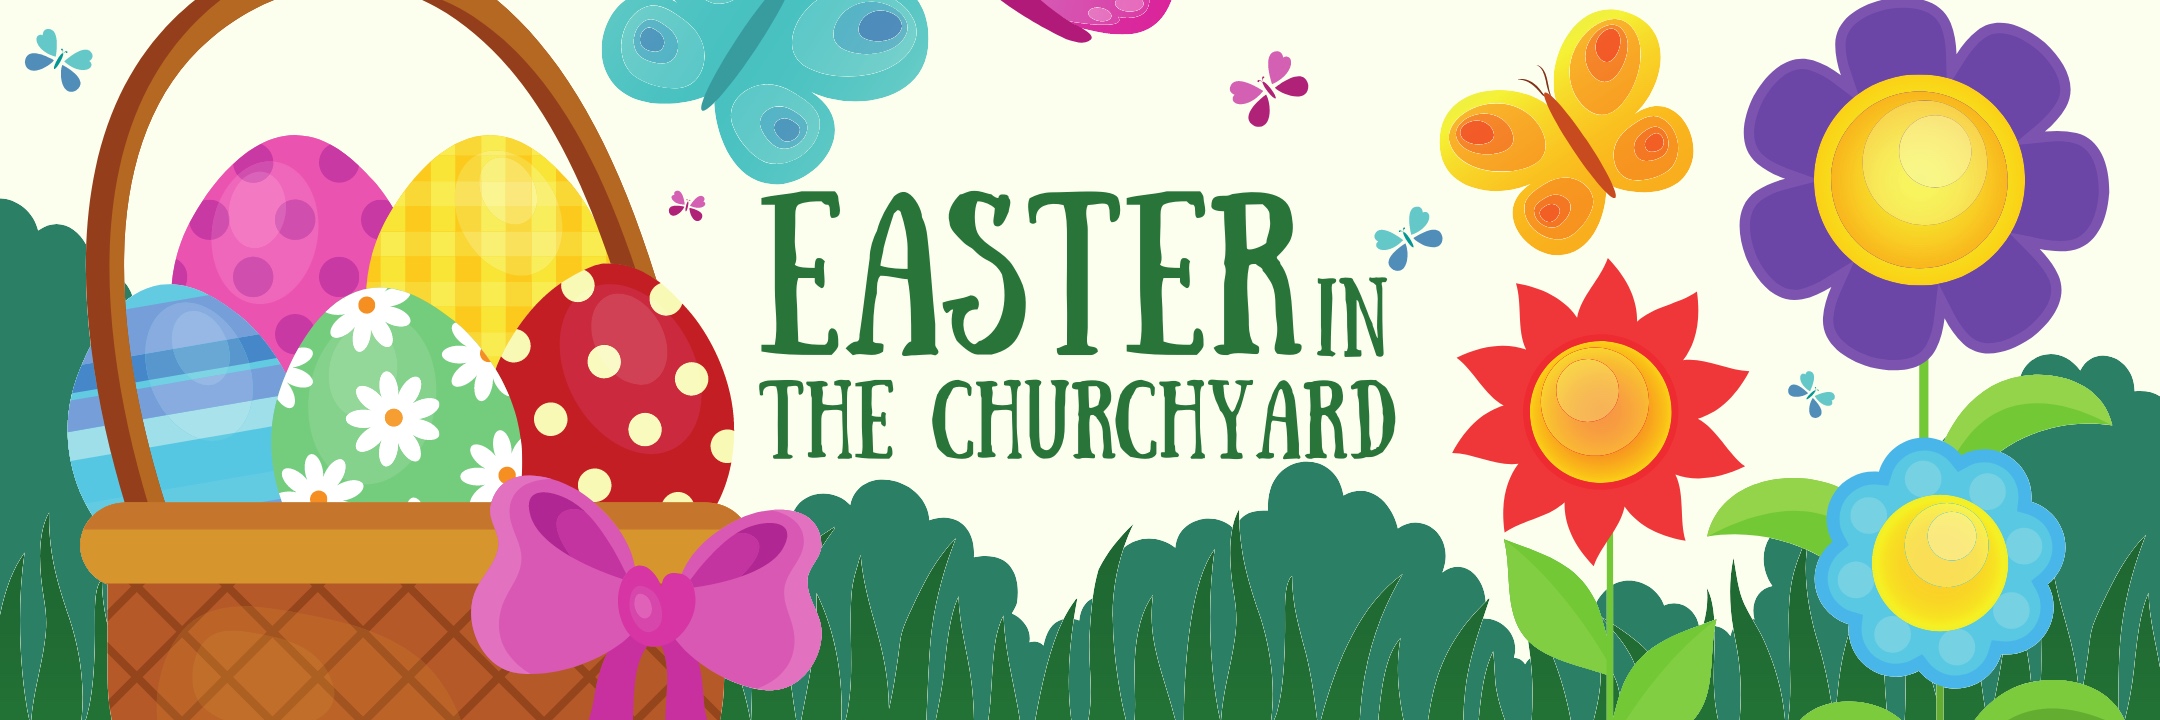 Easter in the Churchyard